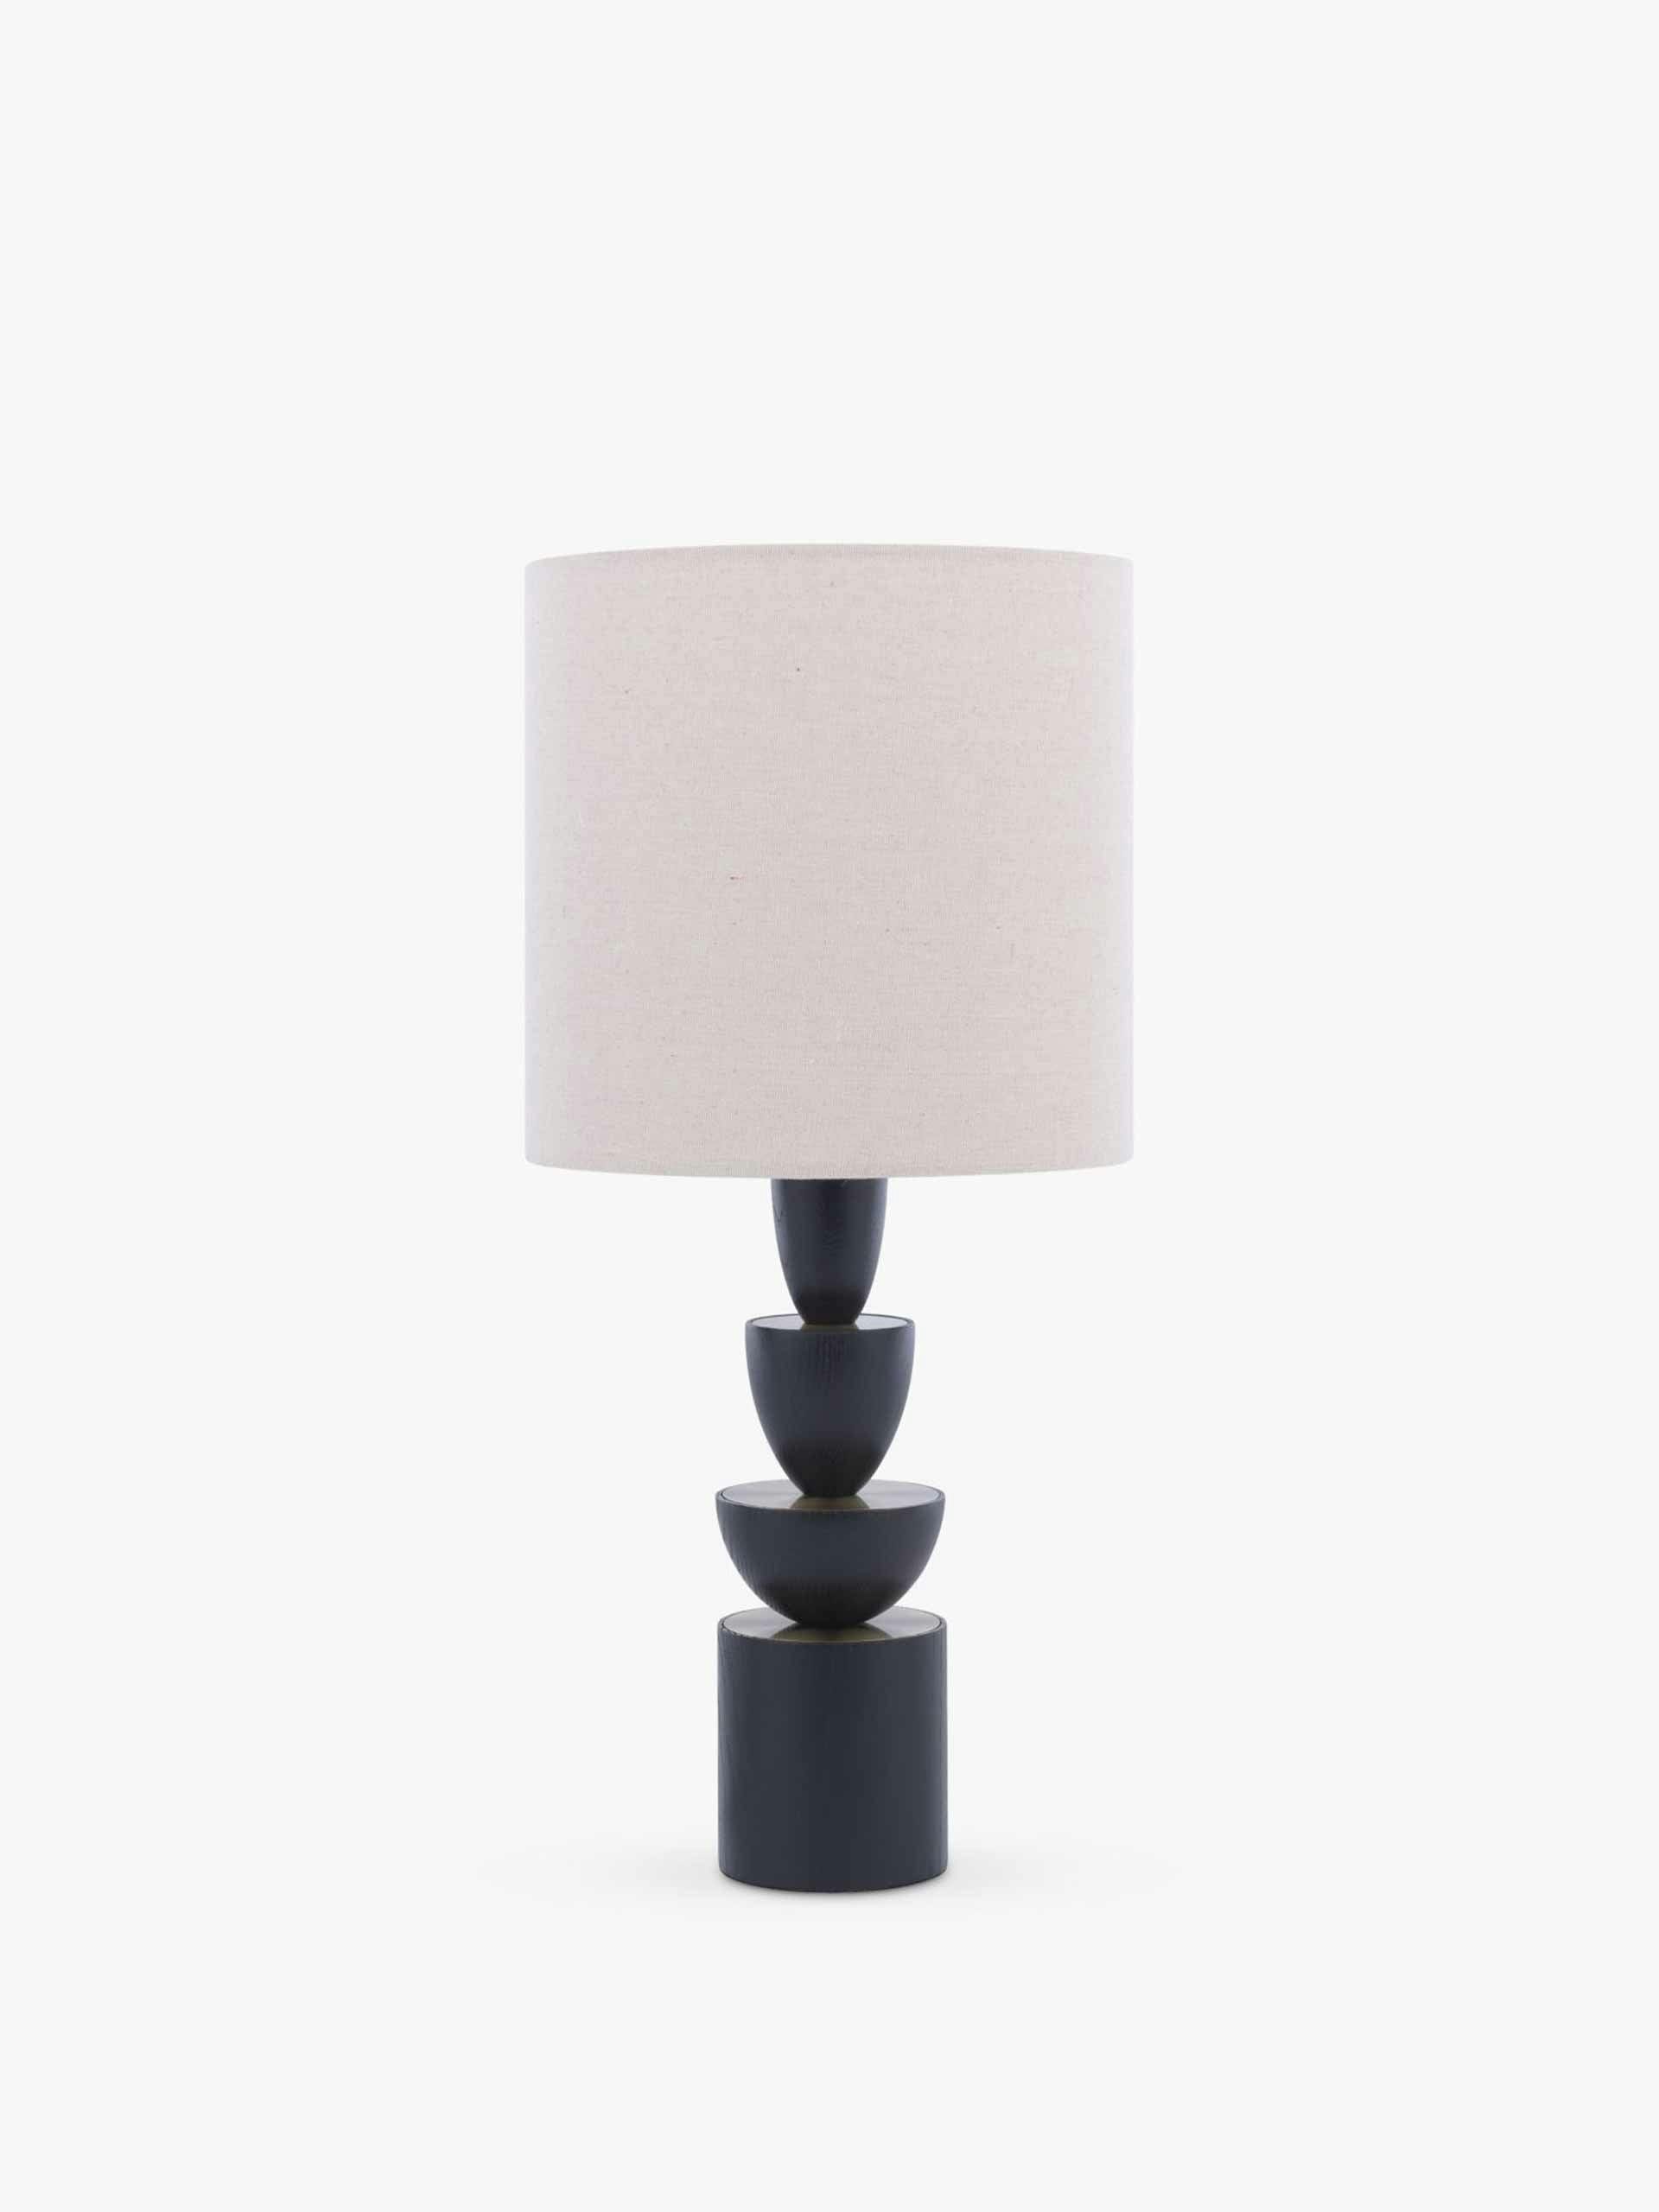 Stacked wooden table lamp